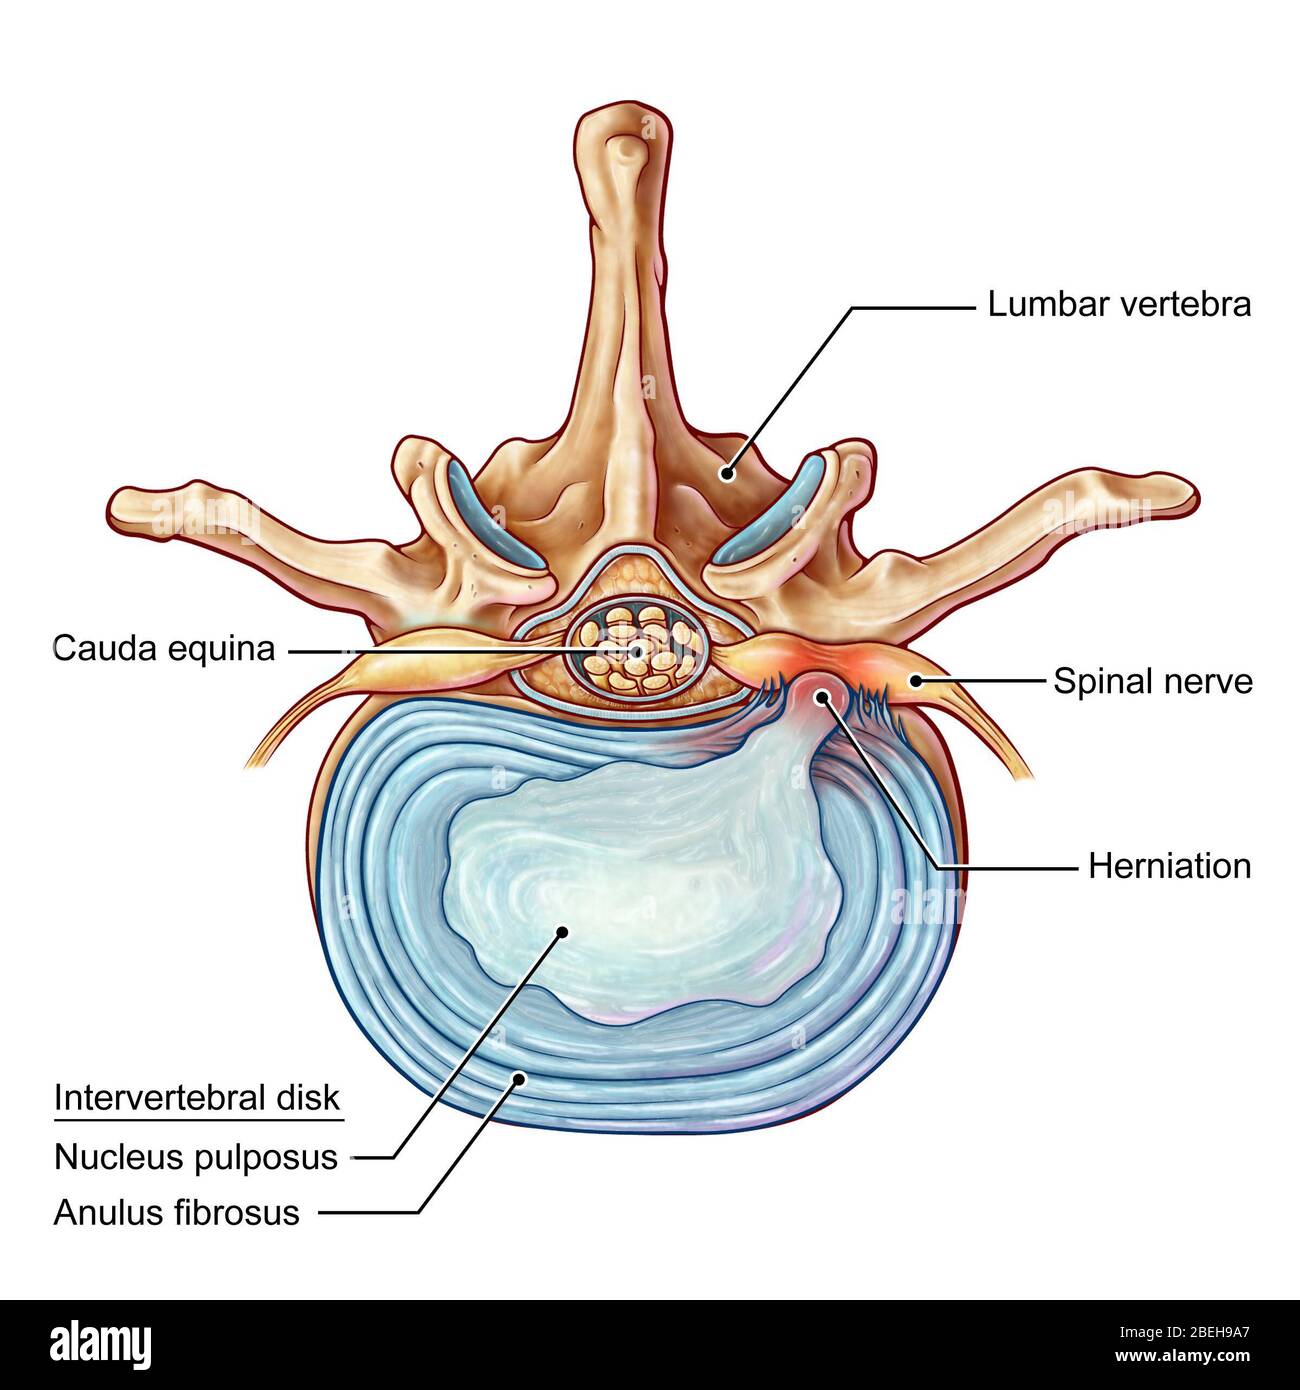 An illustration of a posterolateral herniation of an intervertebral disk in the lumbar spine.  Individuals suffer from a herniated disk when the outer fibrous tissue of the disk, known as the anulus fibrosus, can rupture due to trauma or old age.  As a result, the gel-like center of the disk protrudes outward and compresses the nerves in the back, weakening muscles and causing severe local back pain. Stock Photo